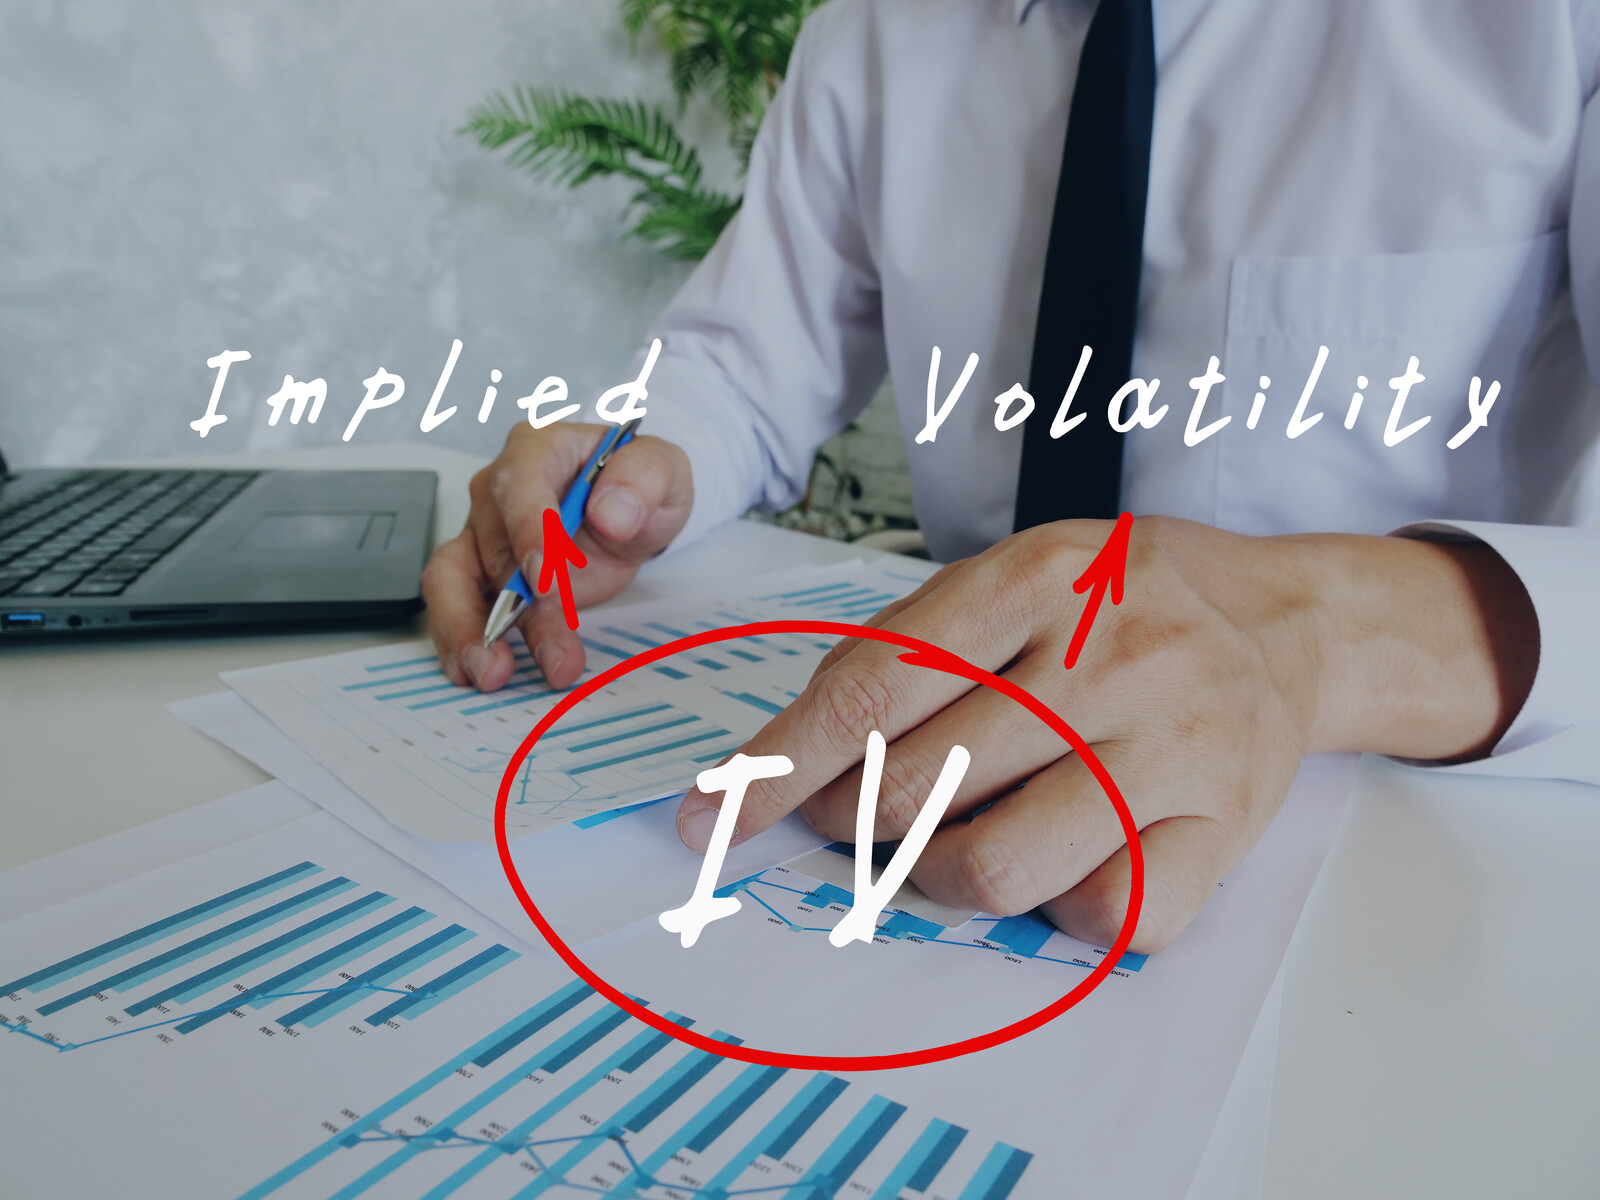 Implied Volatility and Its Affect on Options Trading